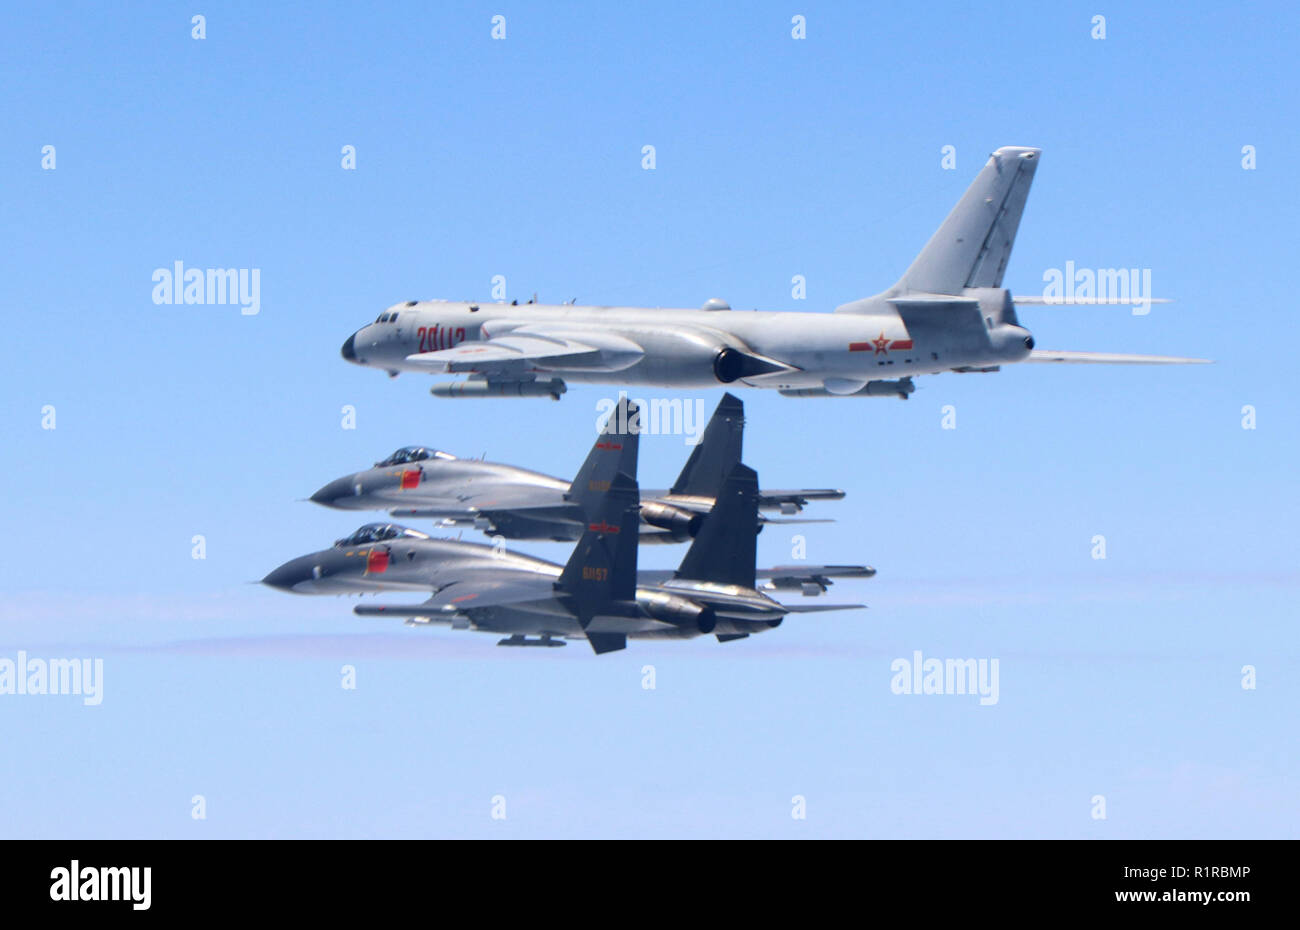 (181114) -- BEIJING, Nov. 14, 2018 (Xinhua) -- Two J-11 fighter jets and a H-6K bomber fly in formation on May 11, 2018. The Chinese Air Force announced a roadmap for building a stronger modern air force in three steps. The building of a stronger modern air force is in line with the overall goal of building national defense and the armed forces, Lieutenant General Xu Anxiang, deputy commander of Chinese Air Force, said at a press conference on celebrating the 69th anniversary of the establishment of Chinese Air Force held in Zhuhai, south China's Guangdong Province, Nov. 11, 2018. (Xinhua/Shao Stock Photo